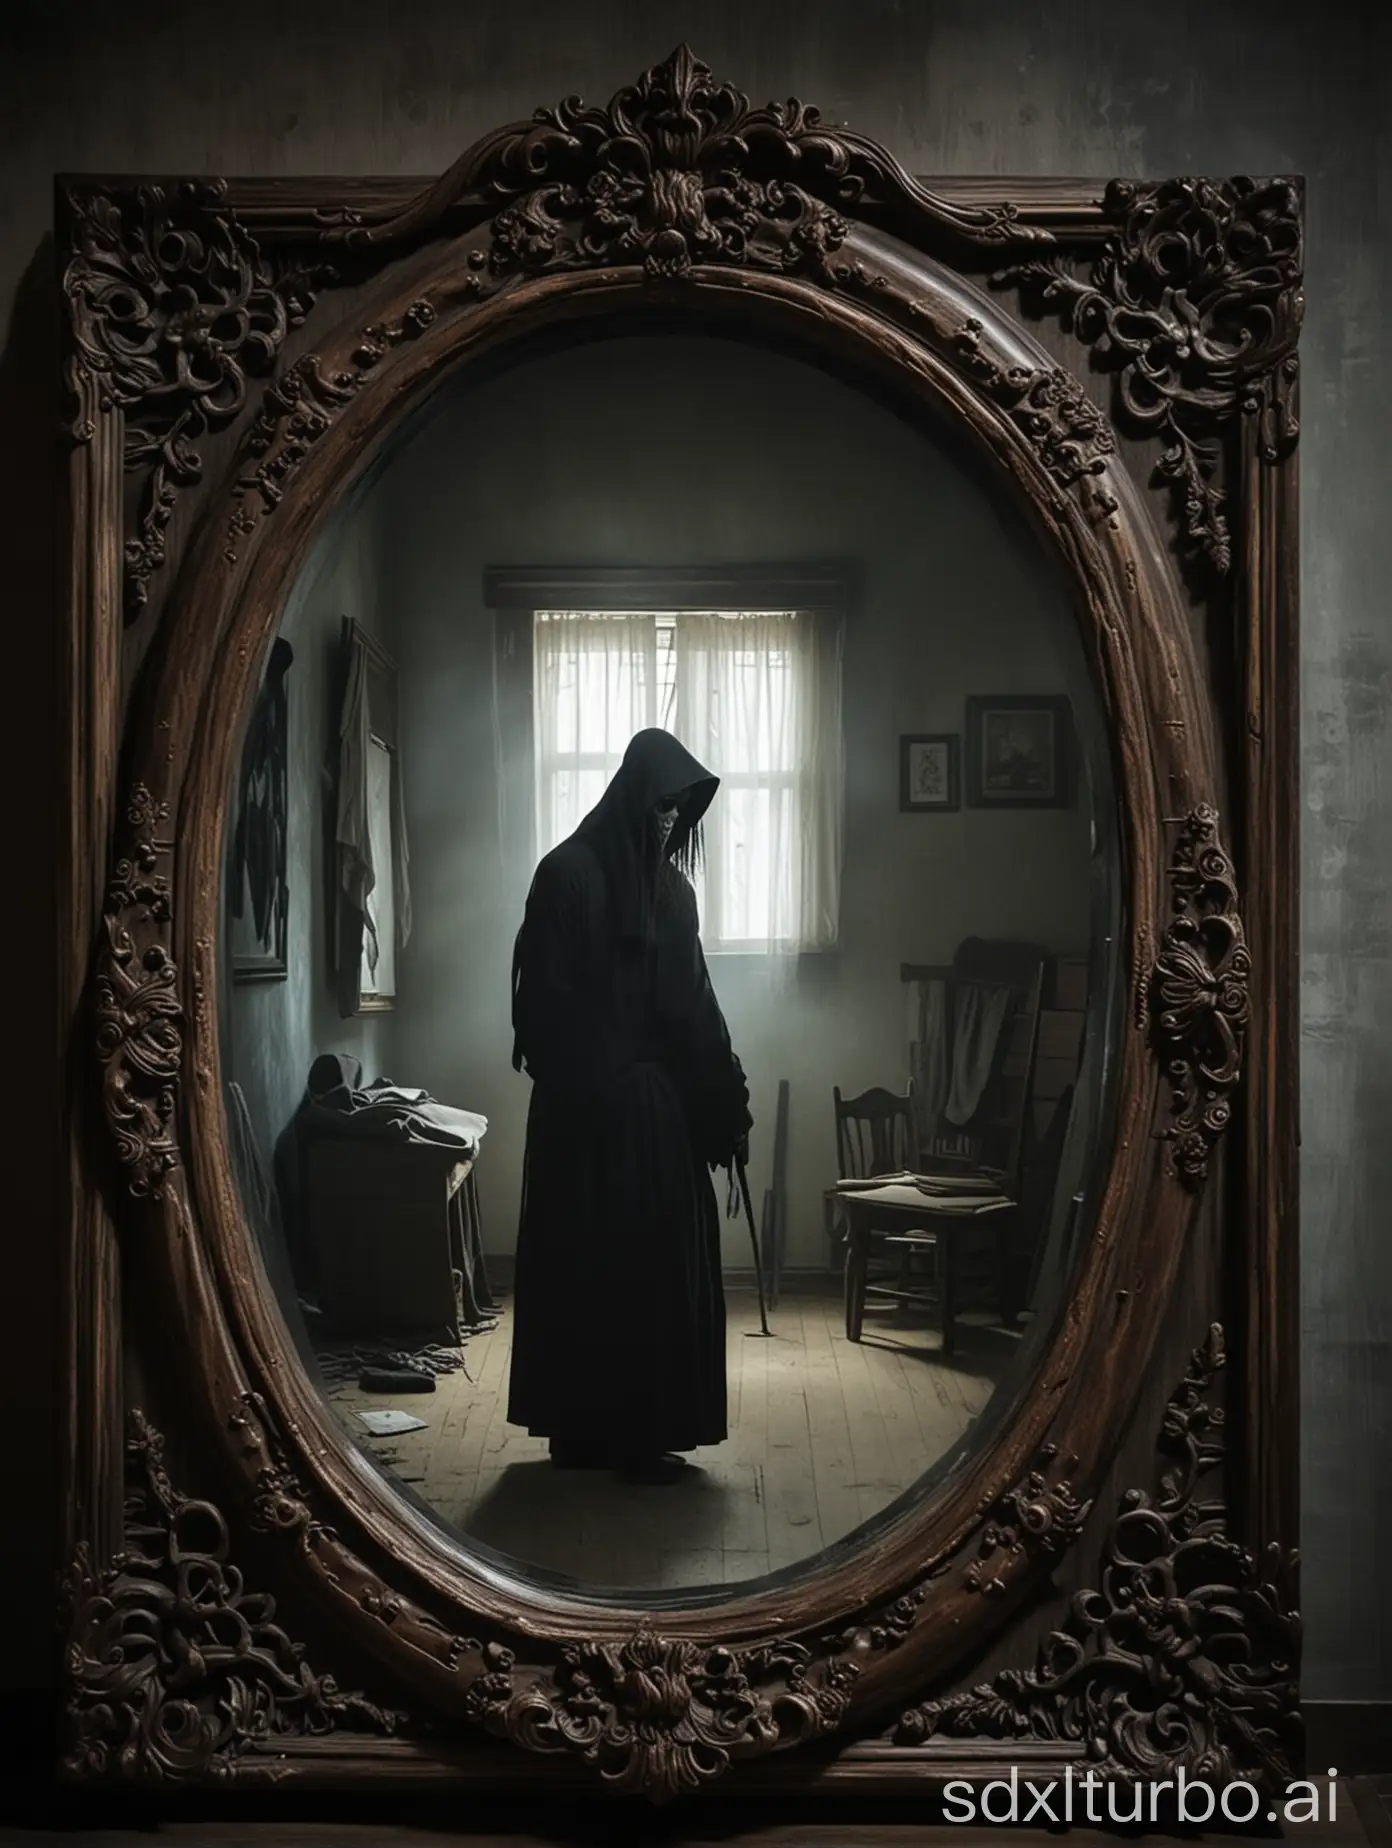 Korean-Grim-Reapers-Reflection-Eerie-and-Mysterious-Atmosphere-Captured-in-a-Mirror